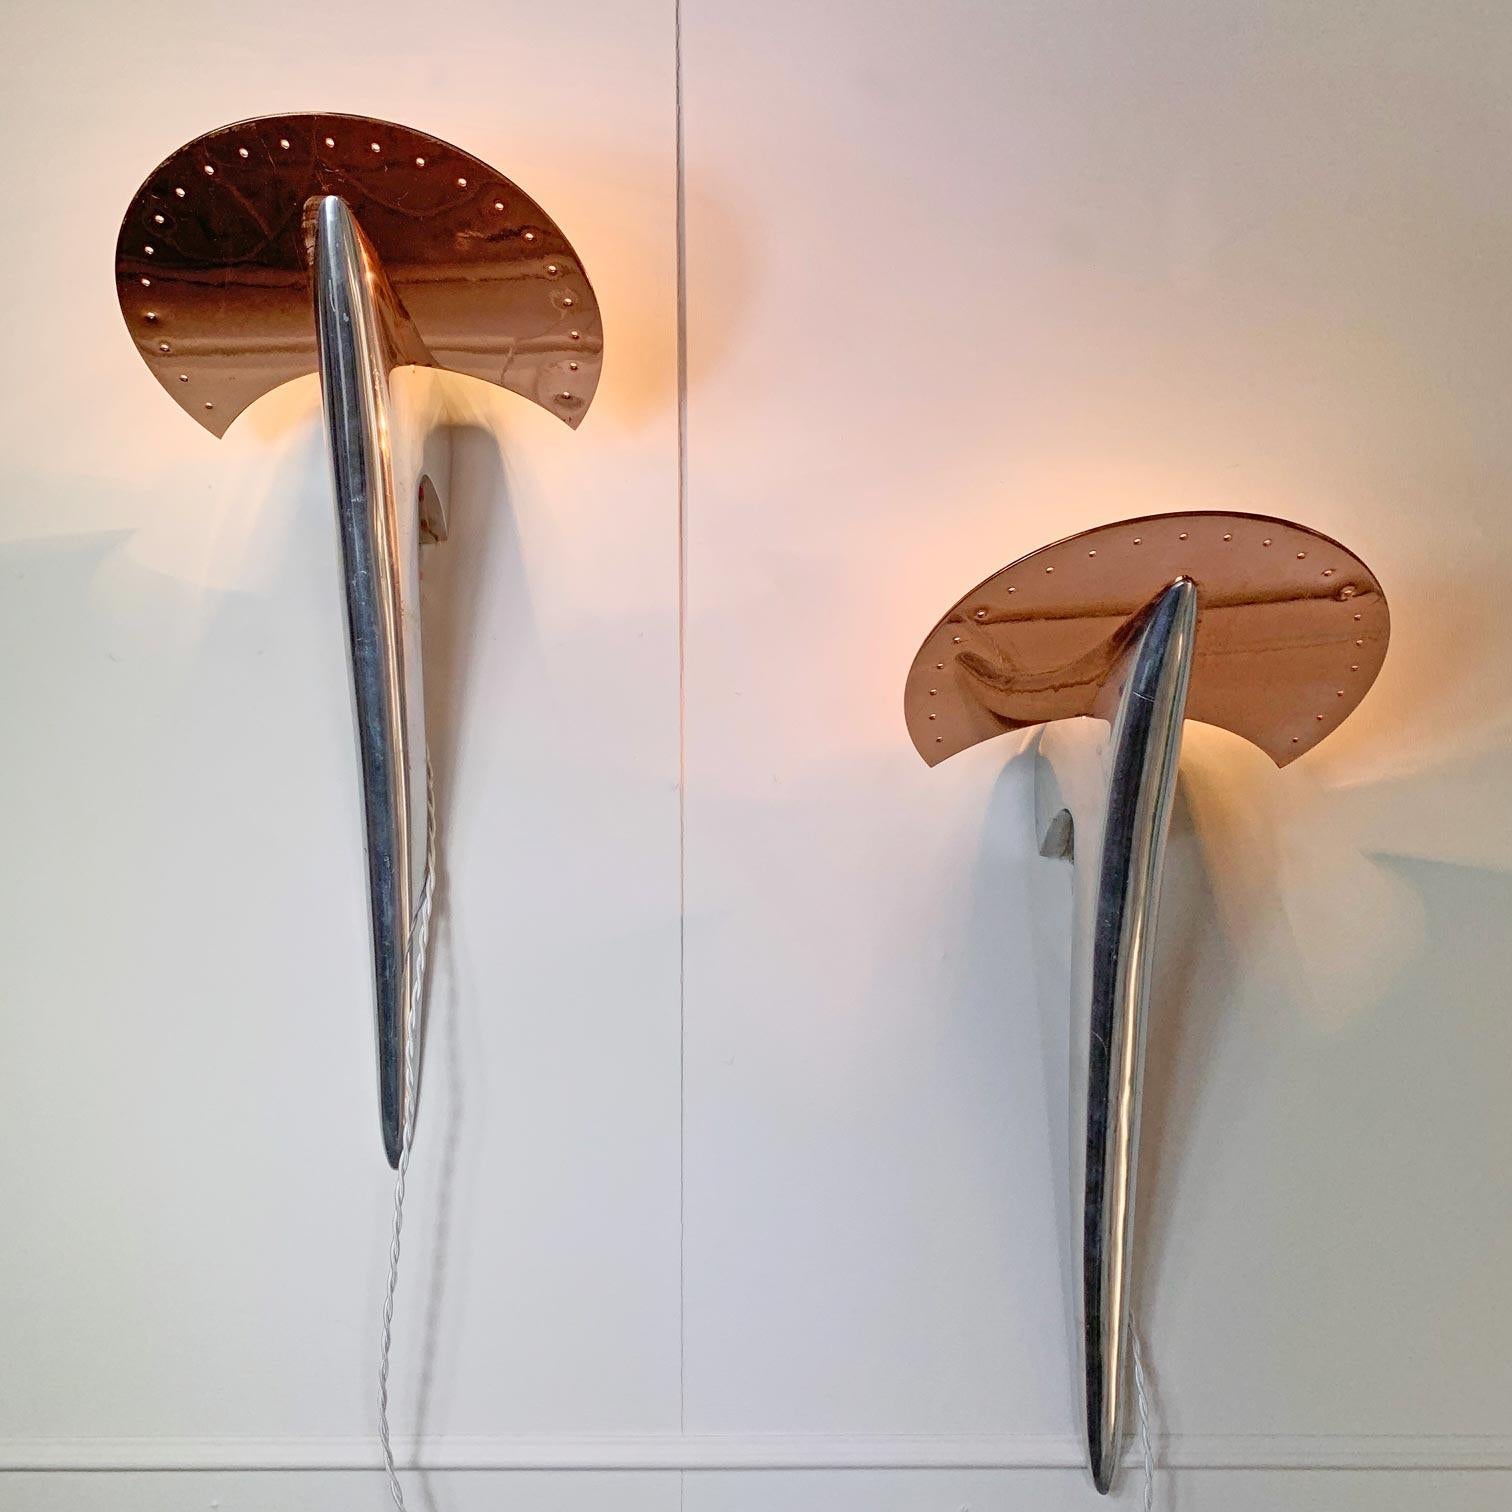 An incredible pair of wall lights in chrome and copper, these were commissioned by the New York Museum of modern art in the 1980’s and were designed by Joan Auger, manufactured by Taller Uno.

The stunning Art Deco inspired futuristic design, with